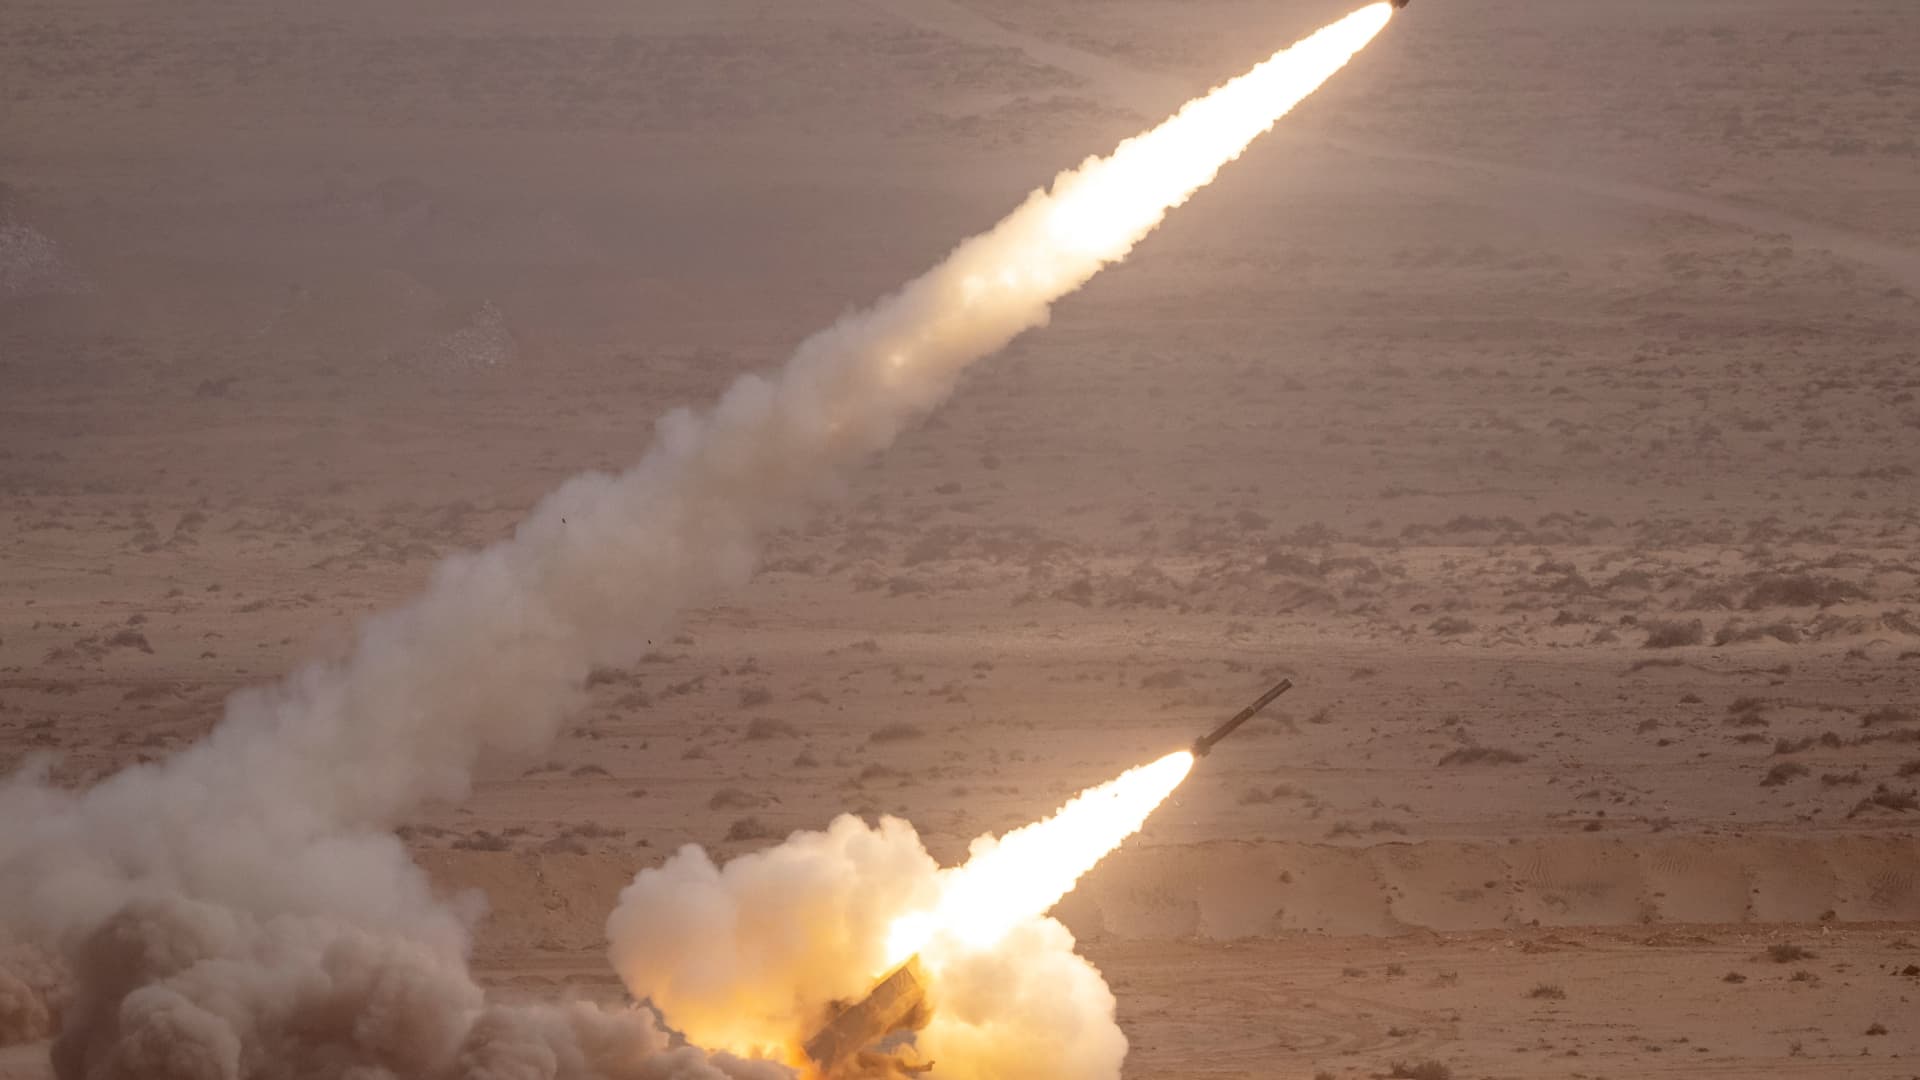 A US M142 High Mobility Artillery Rocket System (HIMARS) firing salvoes during a military exercise on June 30, 2022. The U.S. Department of Defense has announced that the U.S. will be sending Ukraine another $270 million in security assistance, a package which will include high mobility artillery rocket systems and a significant number of tactical drones.